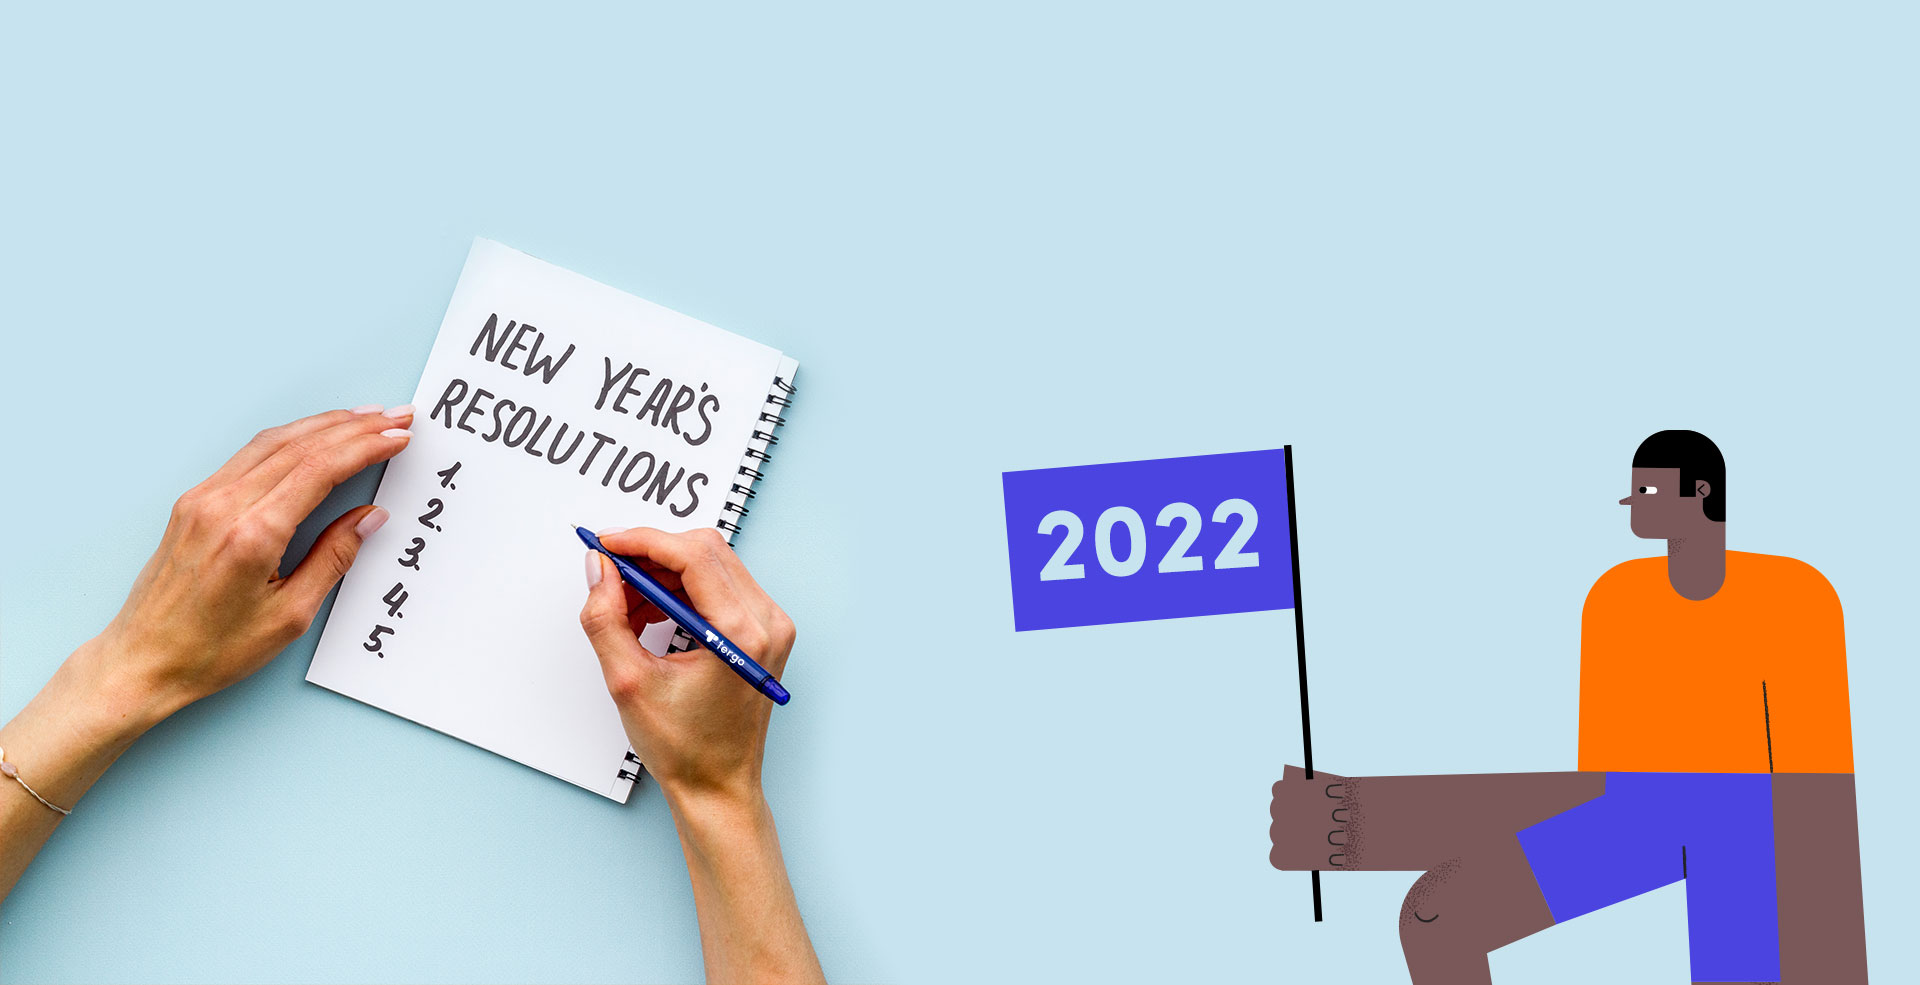 Eco New Year&#8217;s resolutions for a greener 2022 - It pays to go green!